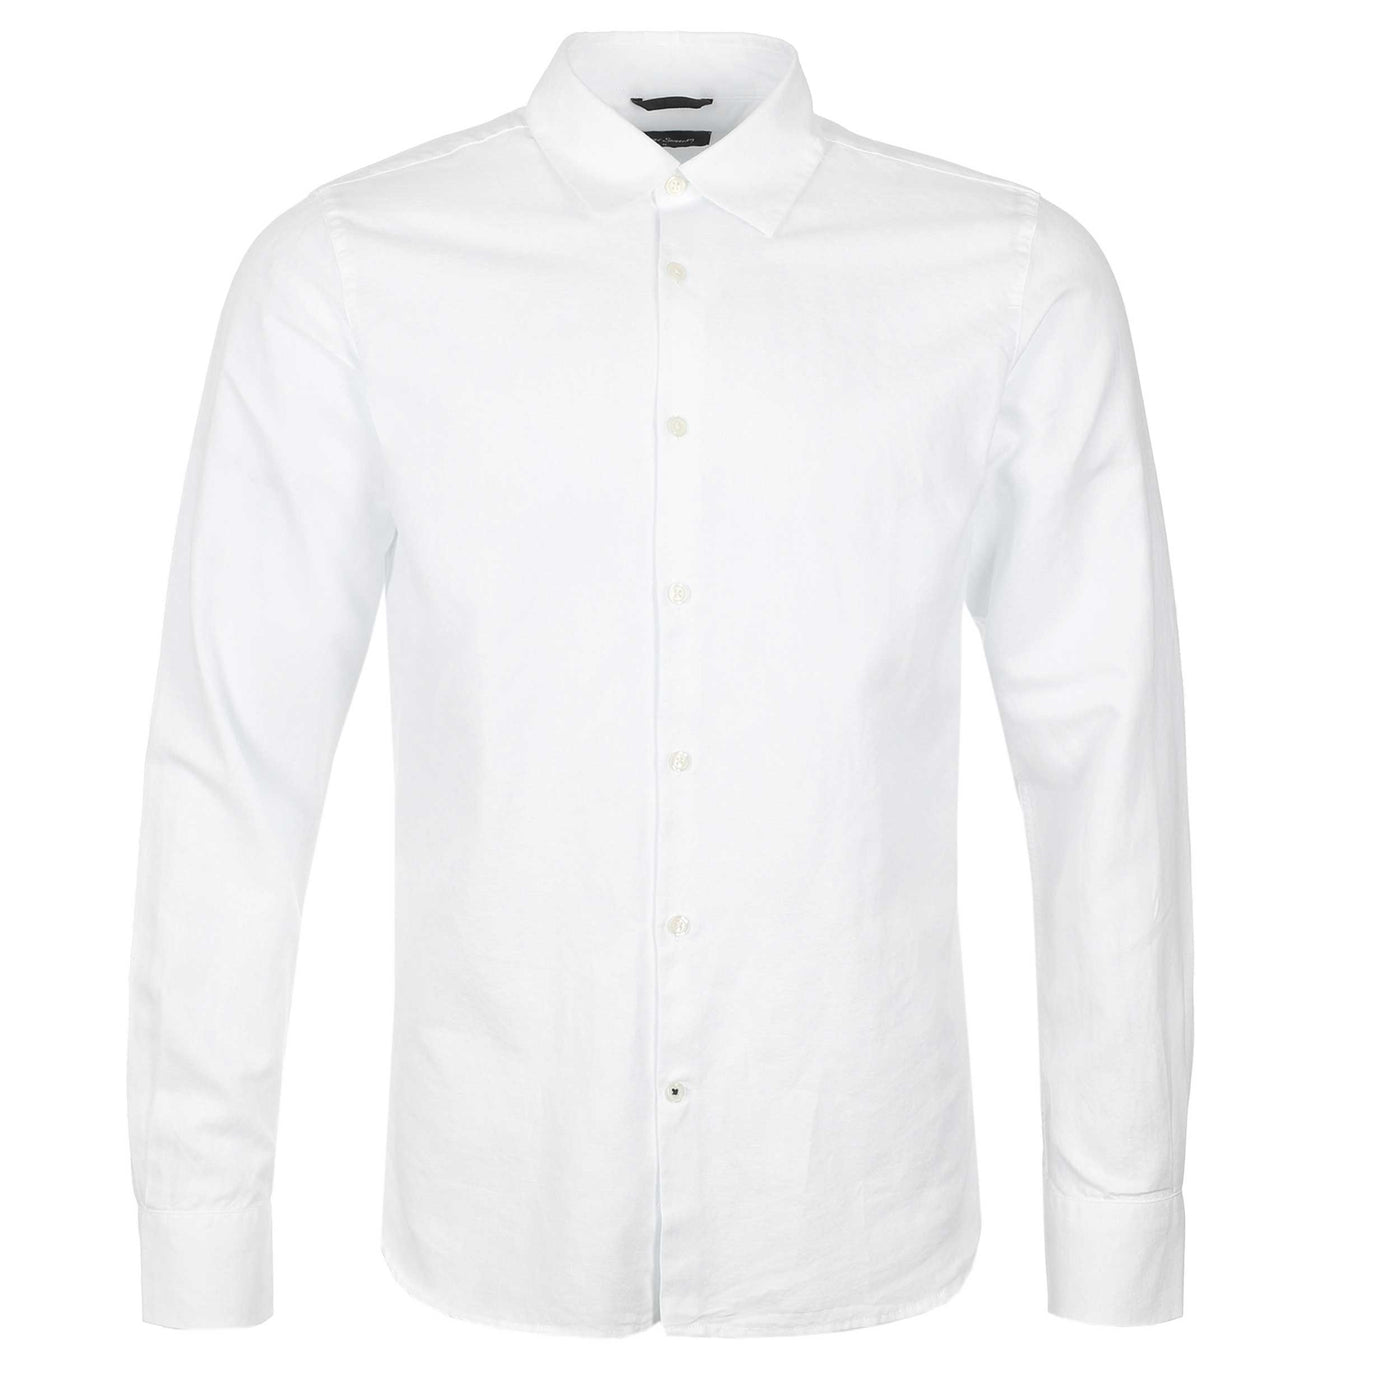 Oliver Sweeney Hawkesworth Shirt in White Front